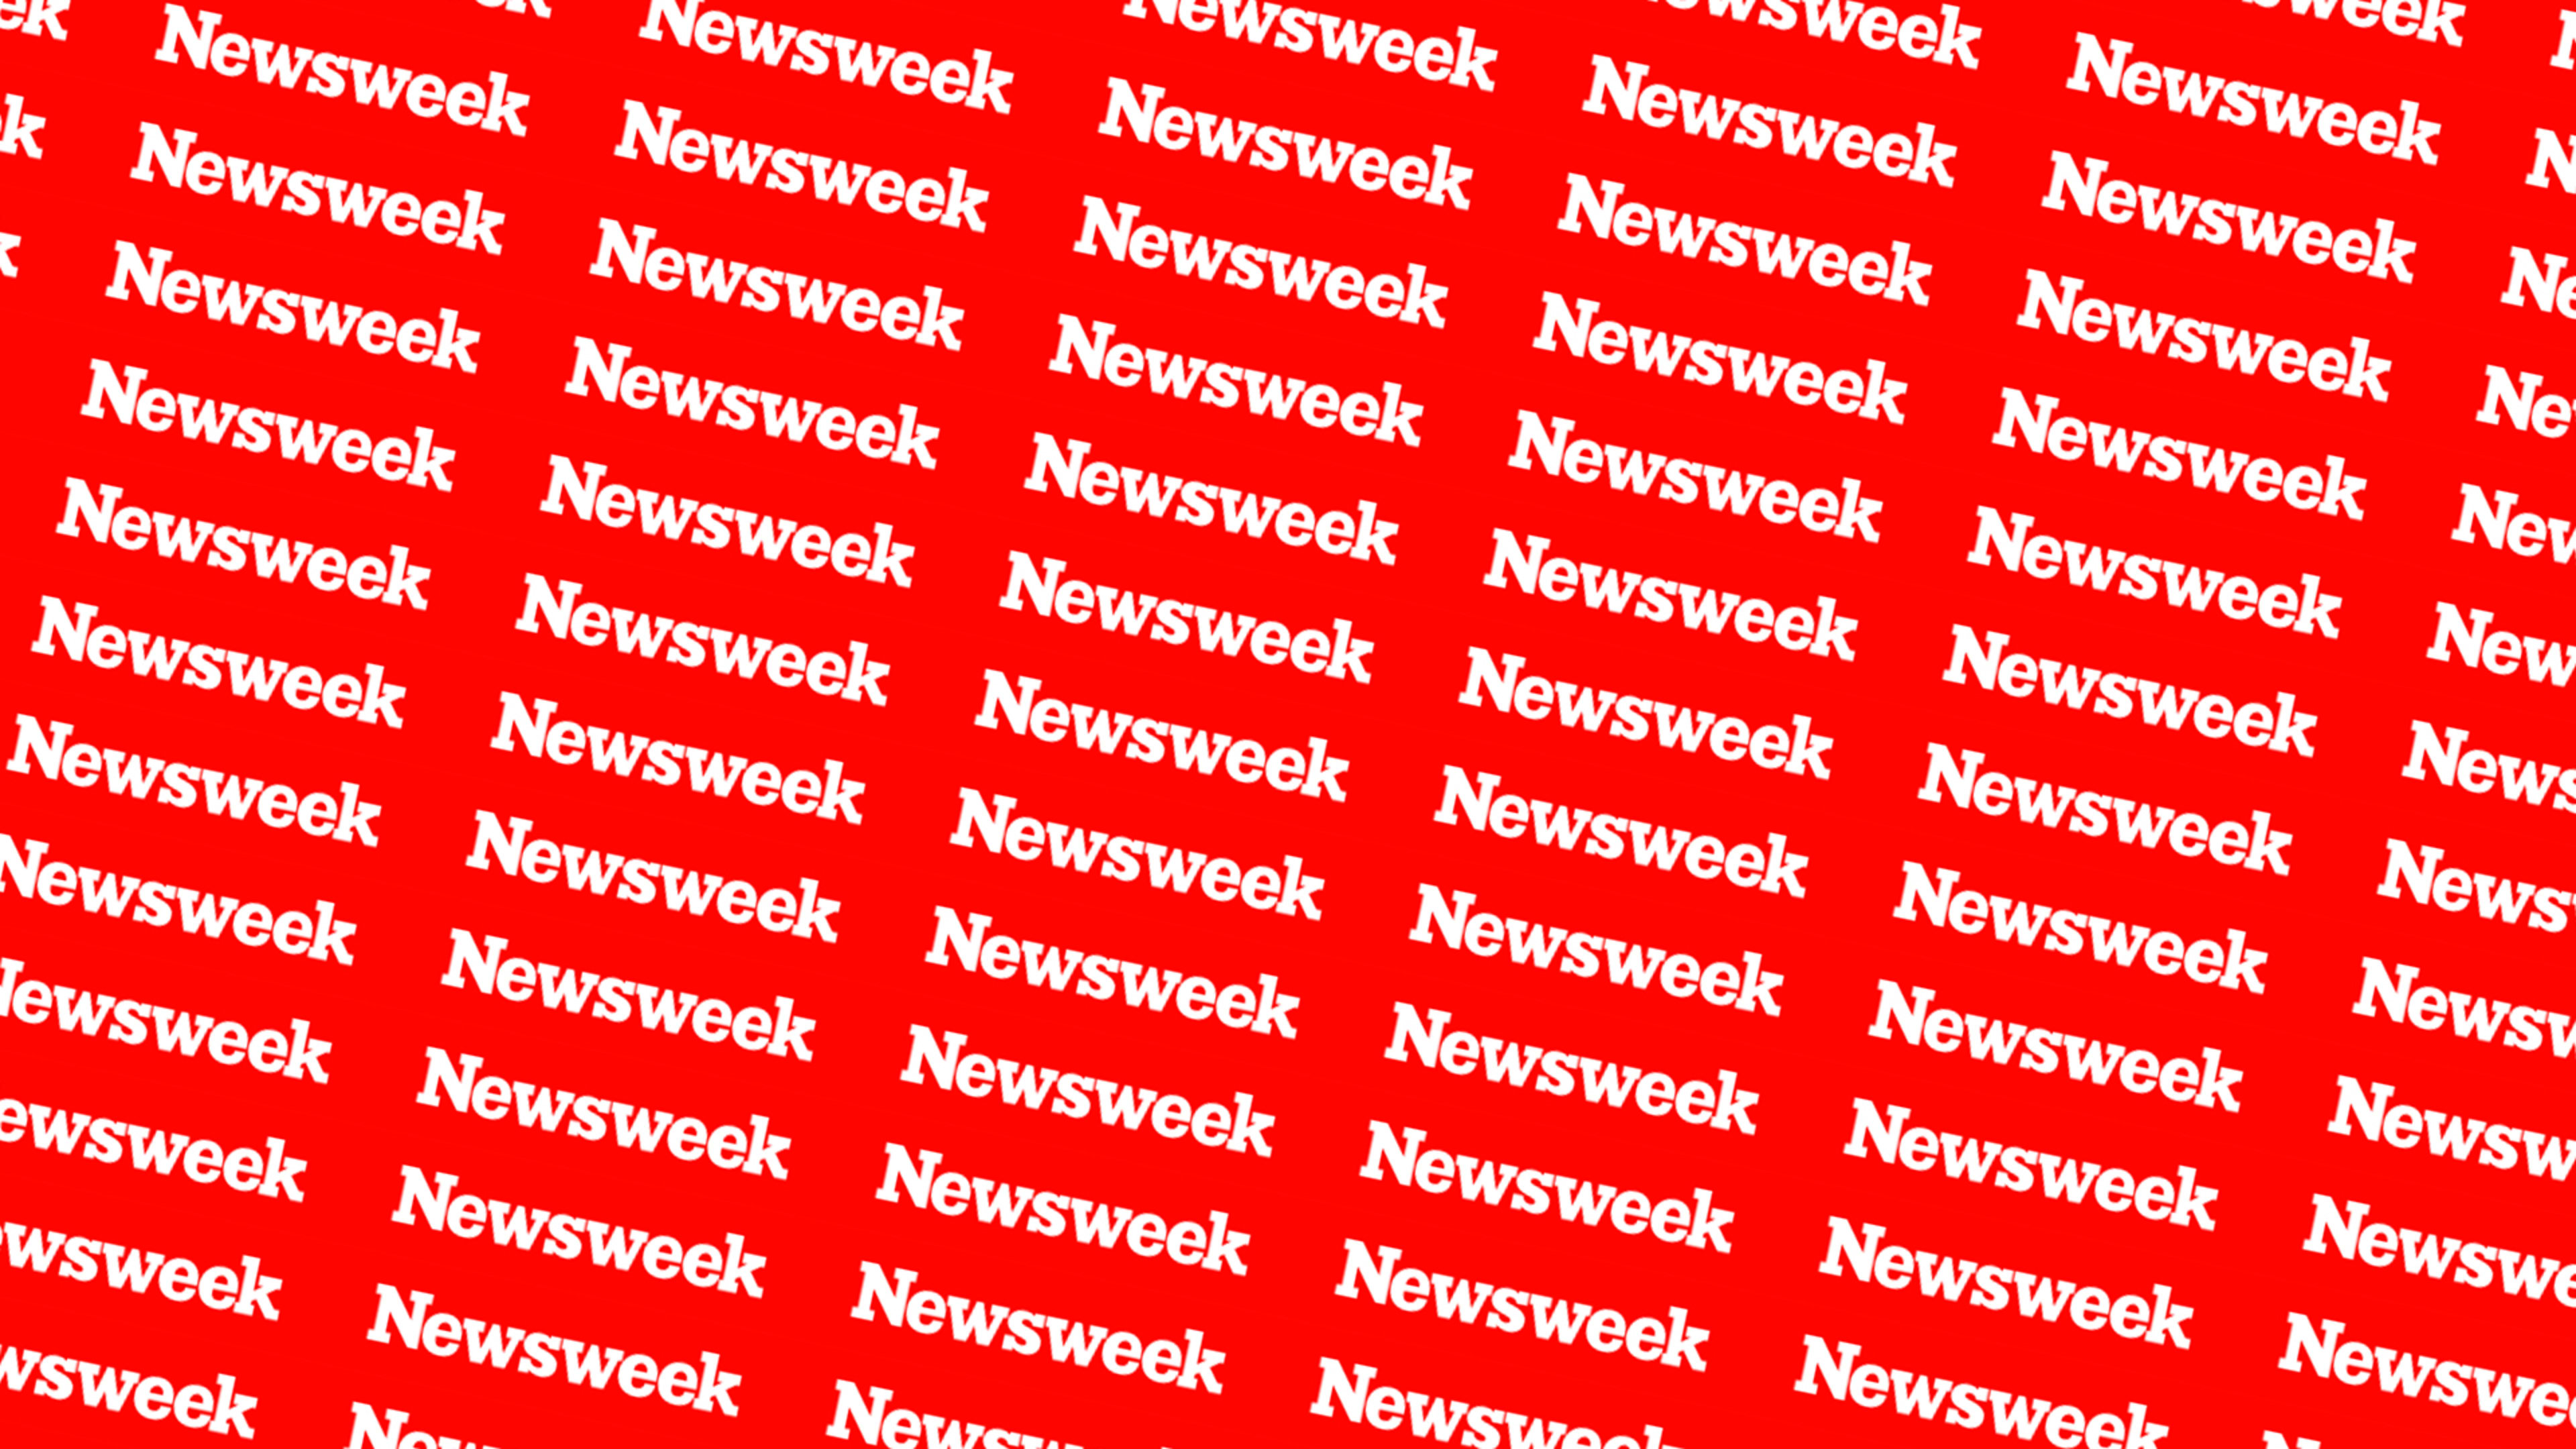 Newsweek reinstates editor accused of sexual harassment, faces more resignations